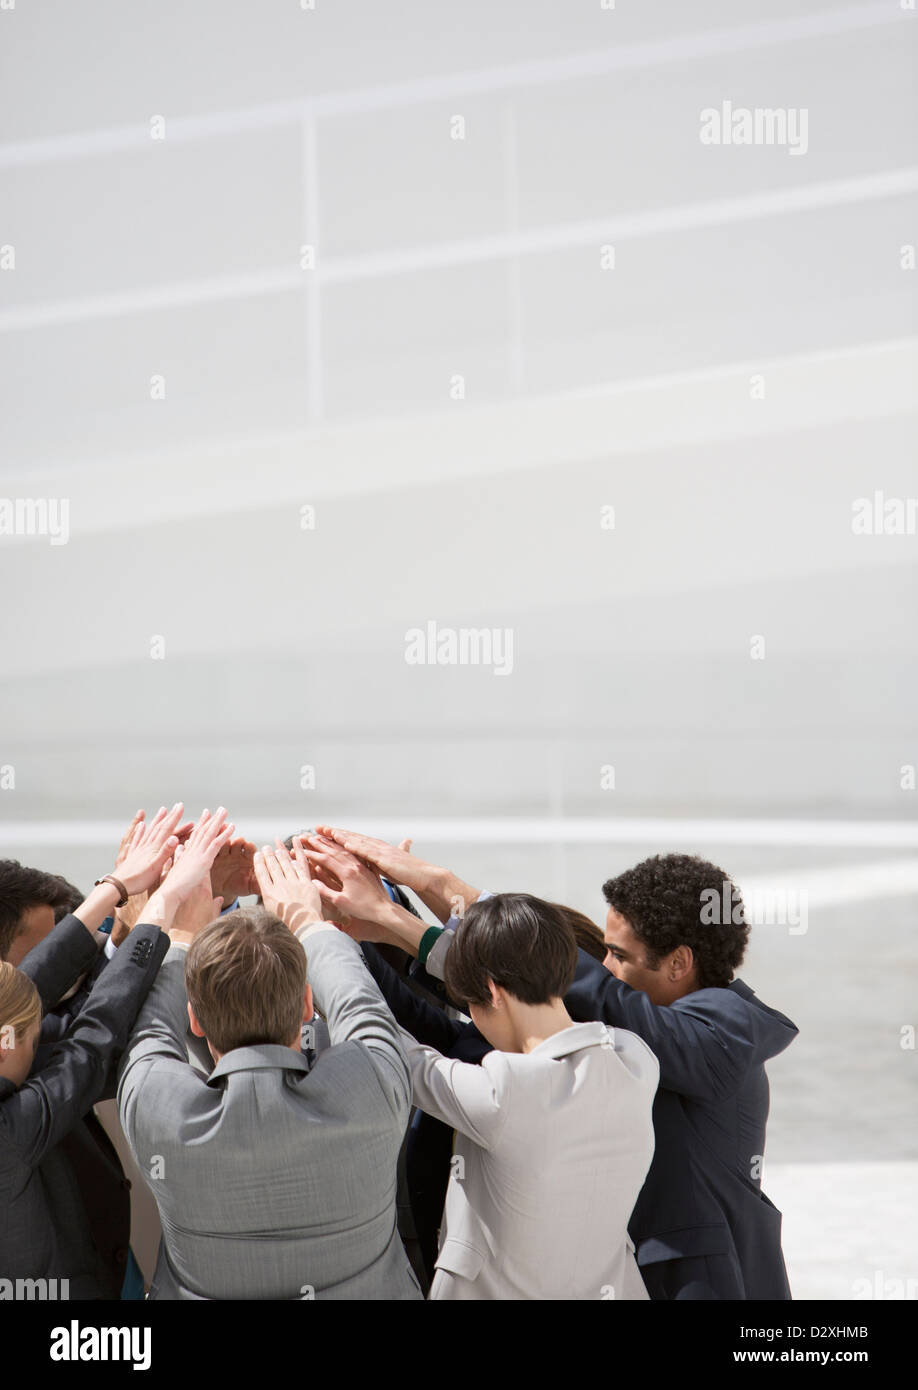 Business people with arms raised in huddle Stock Photo